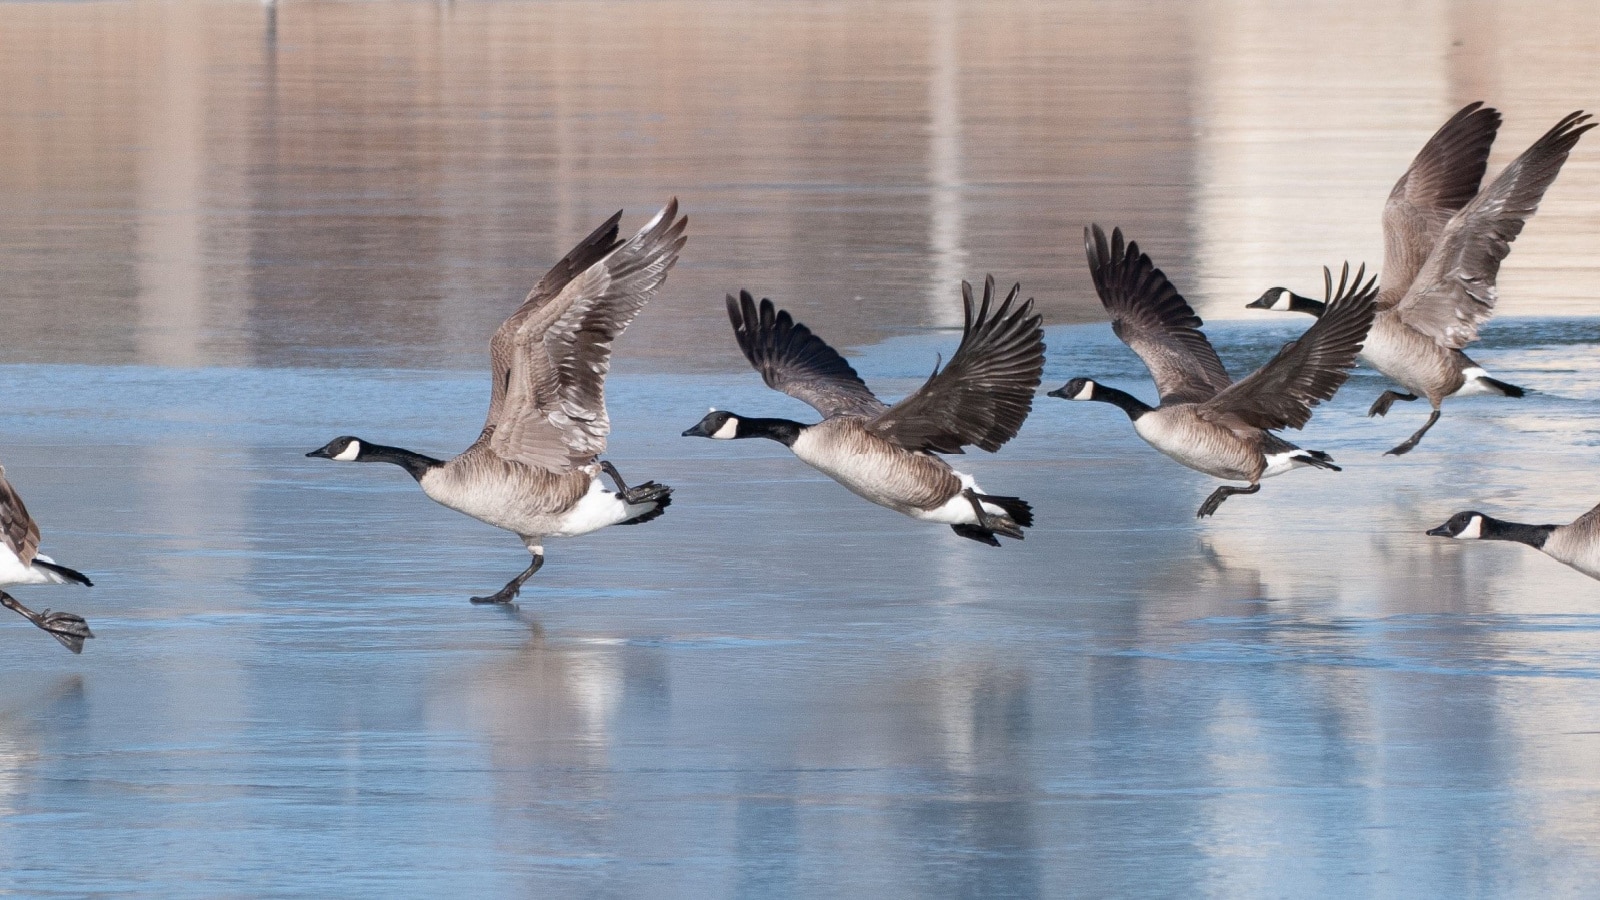 Group of wild geese on an icy lake in winter time in Longmont. Colorado, USA